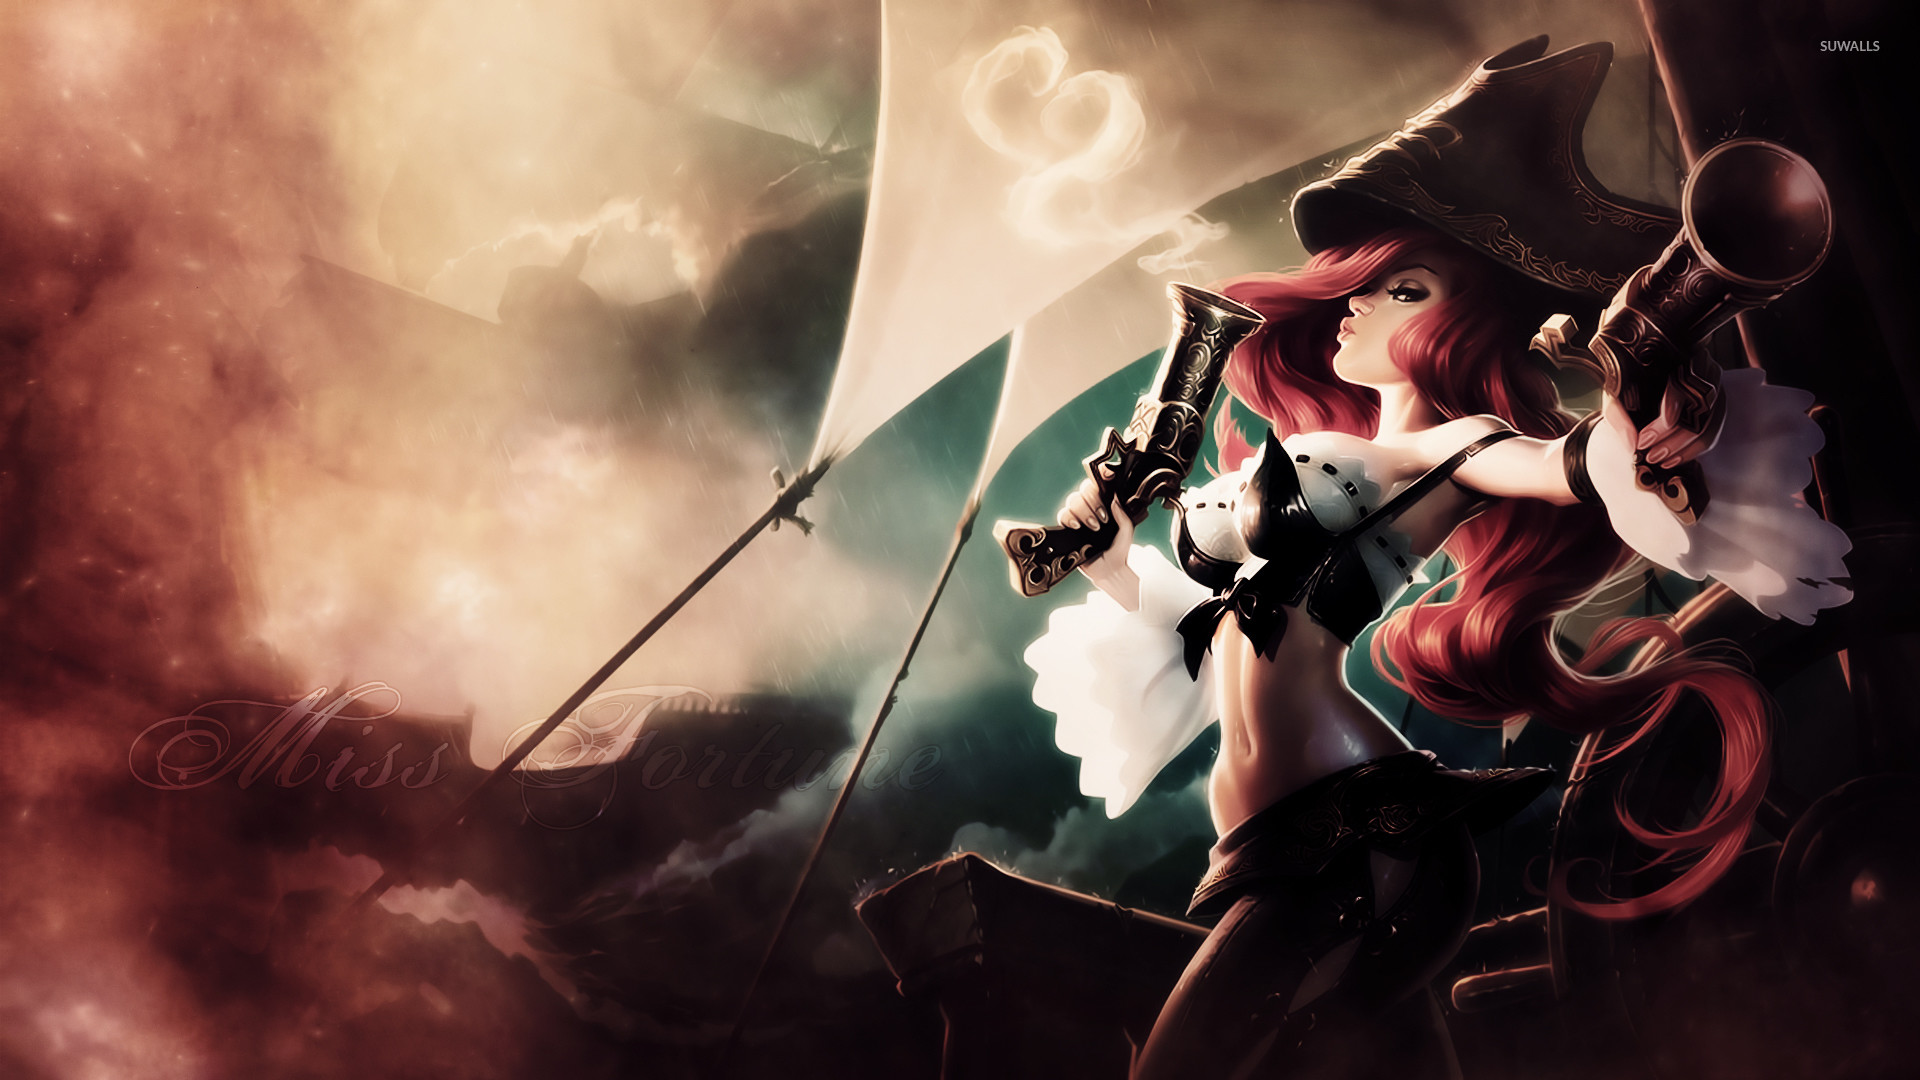 1920x1080 Miss Fortune - League Of Legends [2] Wallpaper - Game Wallpapers .